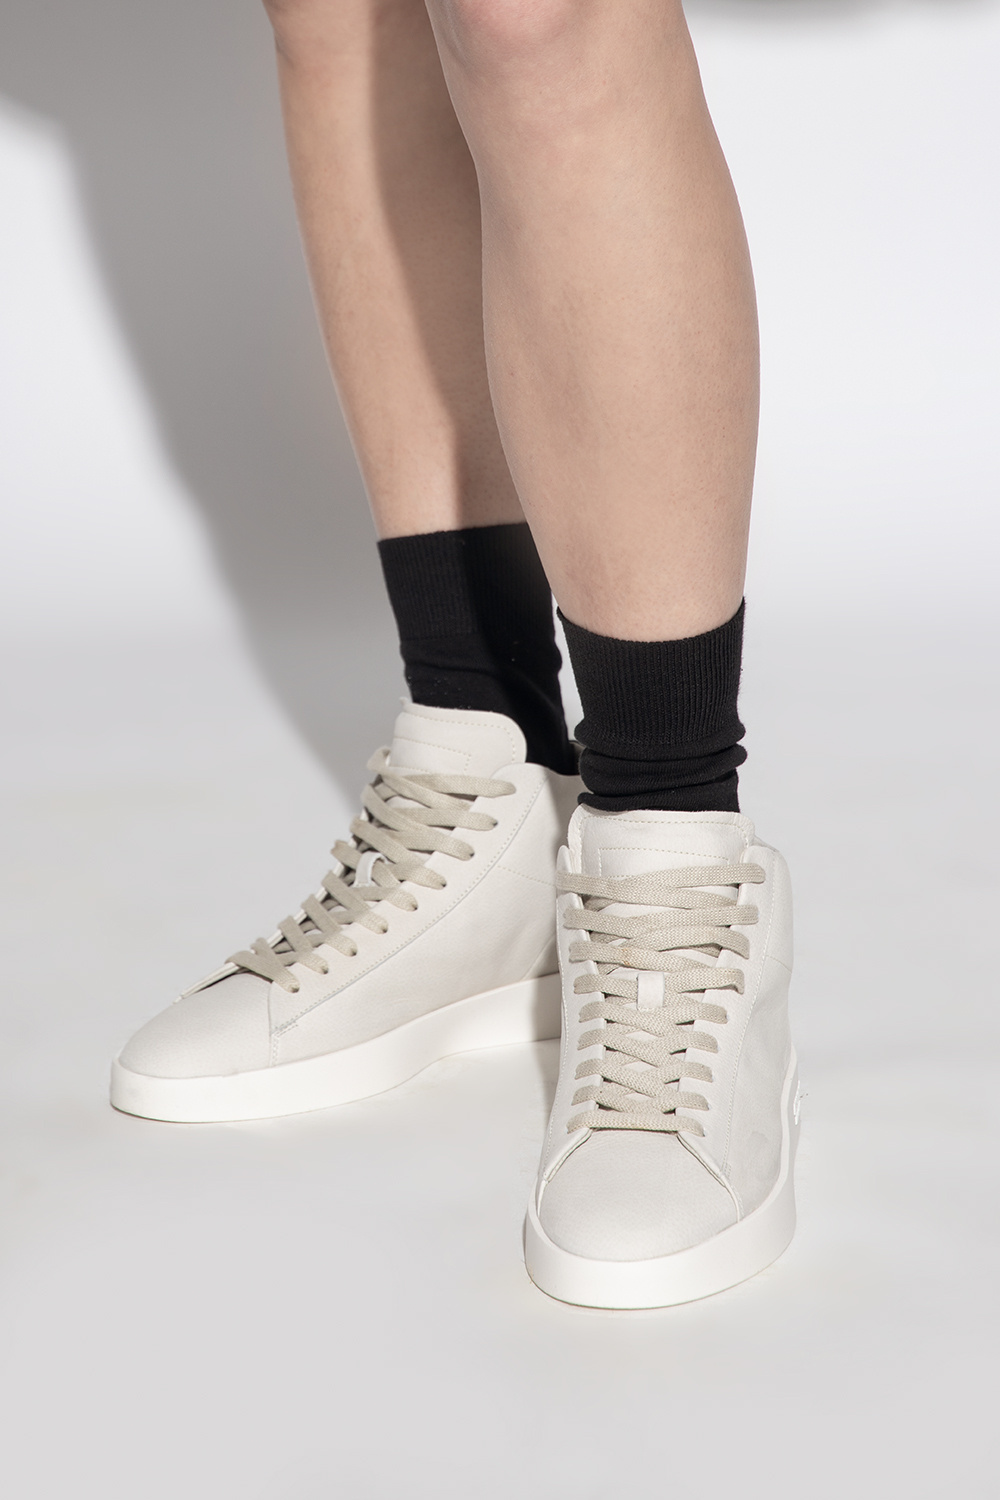 Fear Of God Essentials 'Tennis Mid' sneakers | Women's Shoes | Vitkac